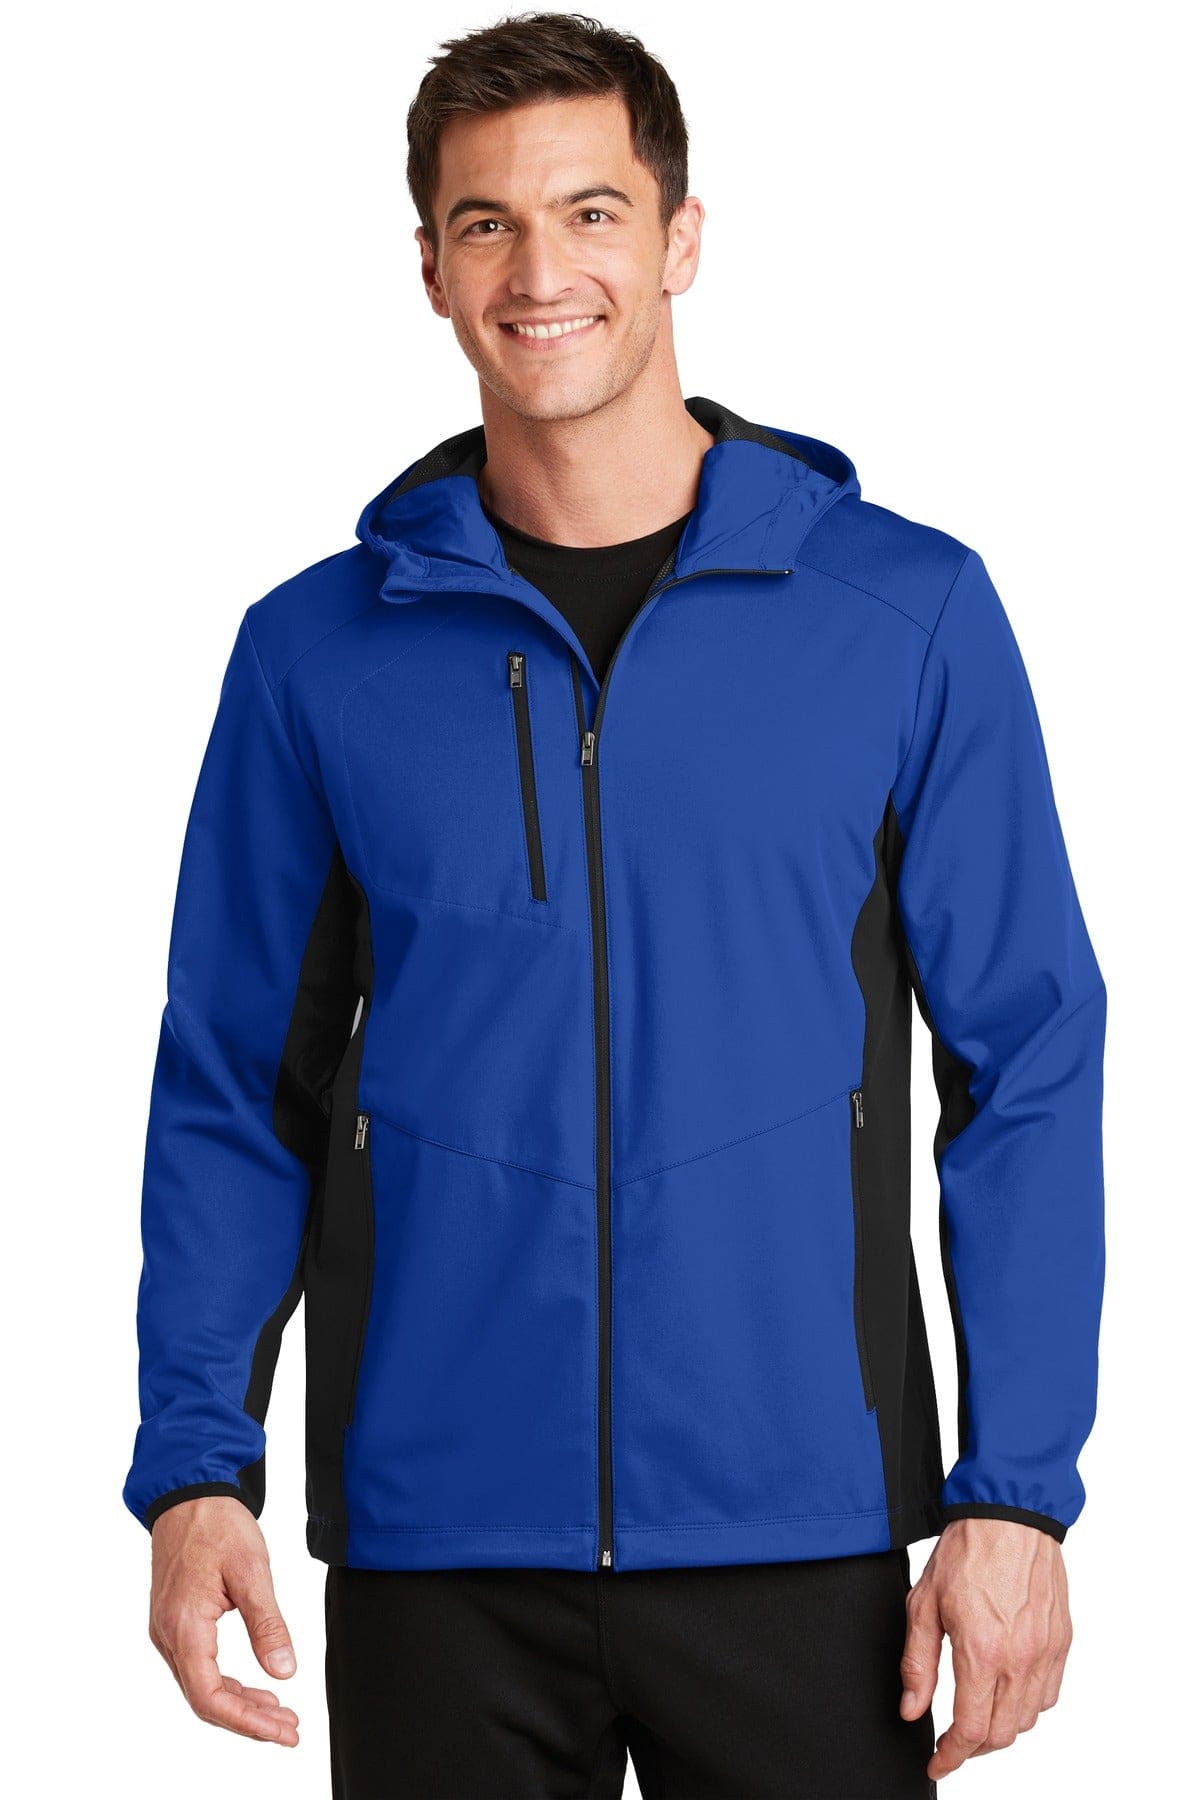 Port Authority Active Hooded Soft Shell Jacket. J719 - Activewear Outerwear